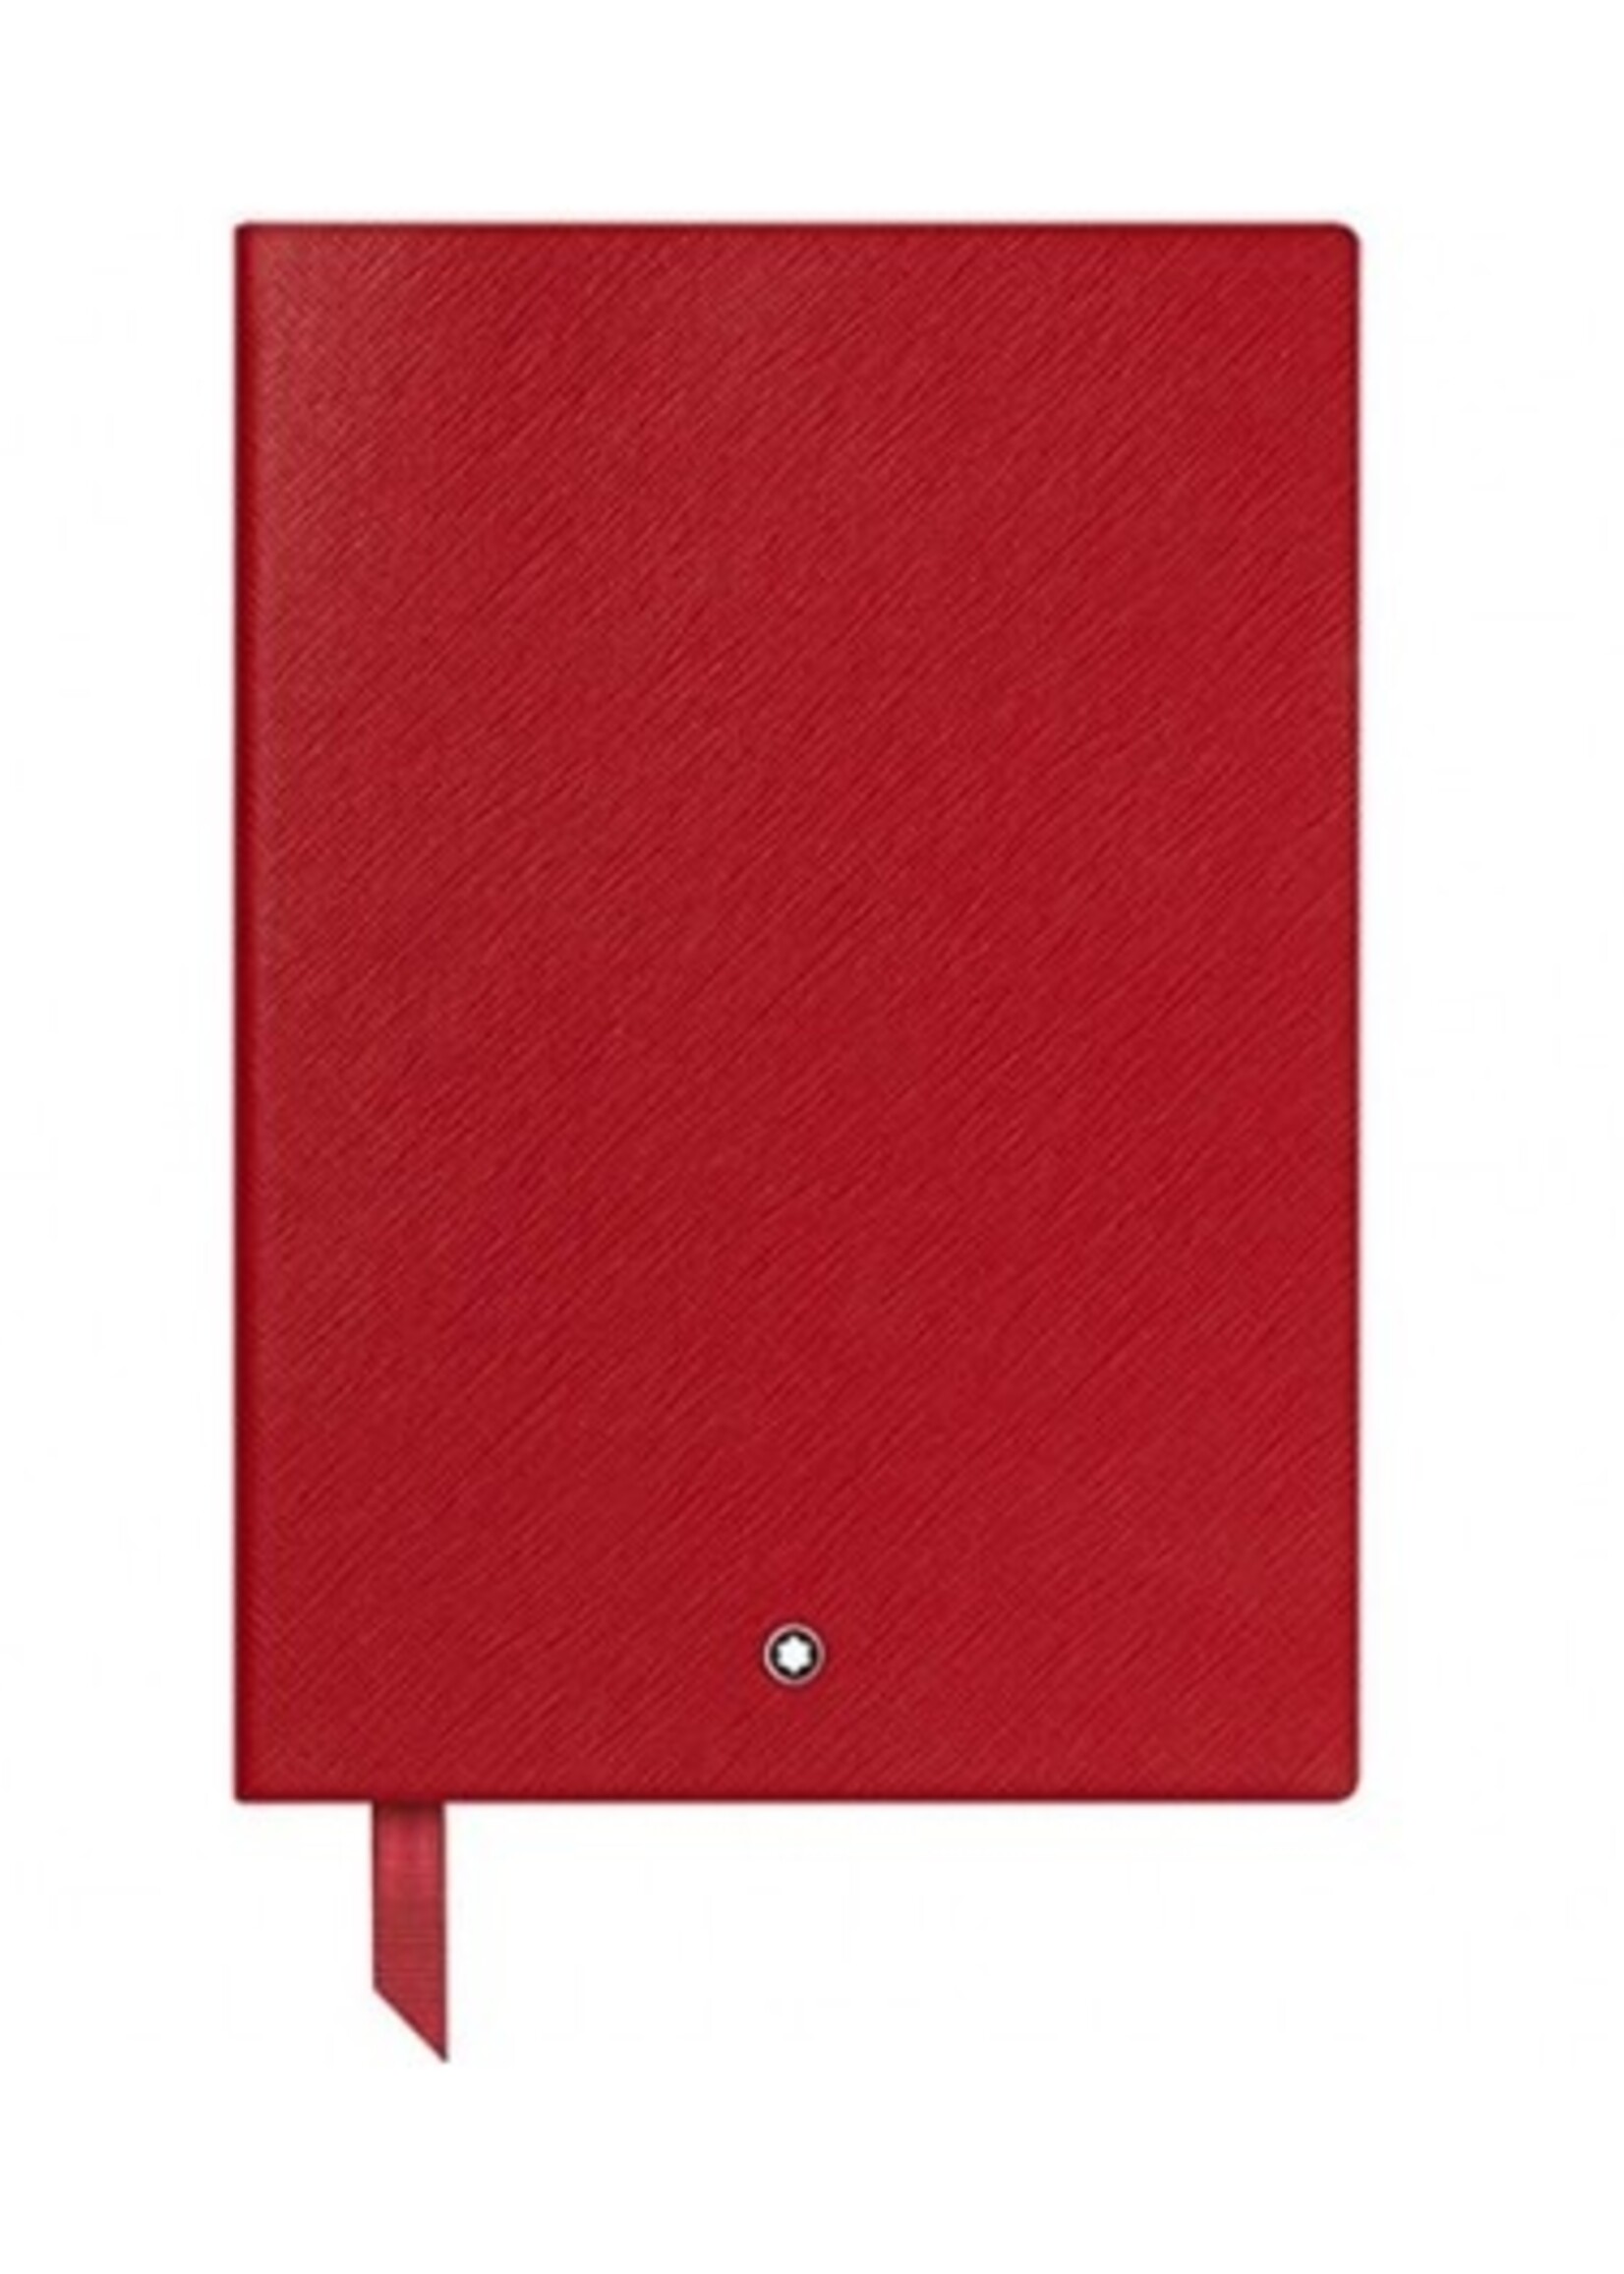 Montblanc STA NOTEBOOK #146 Red, lined